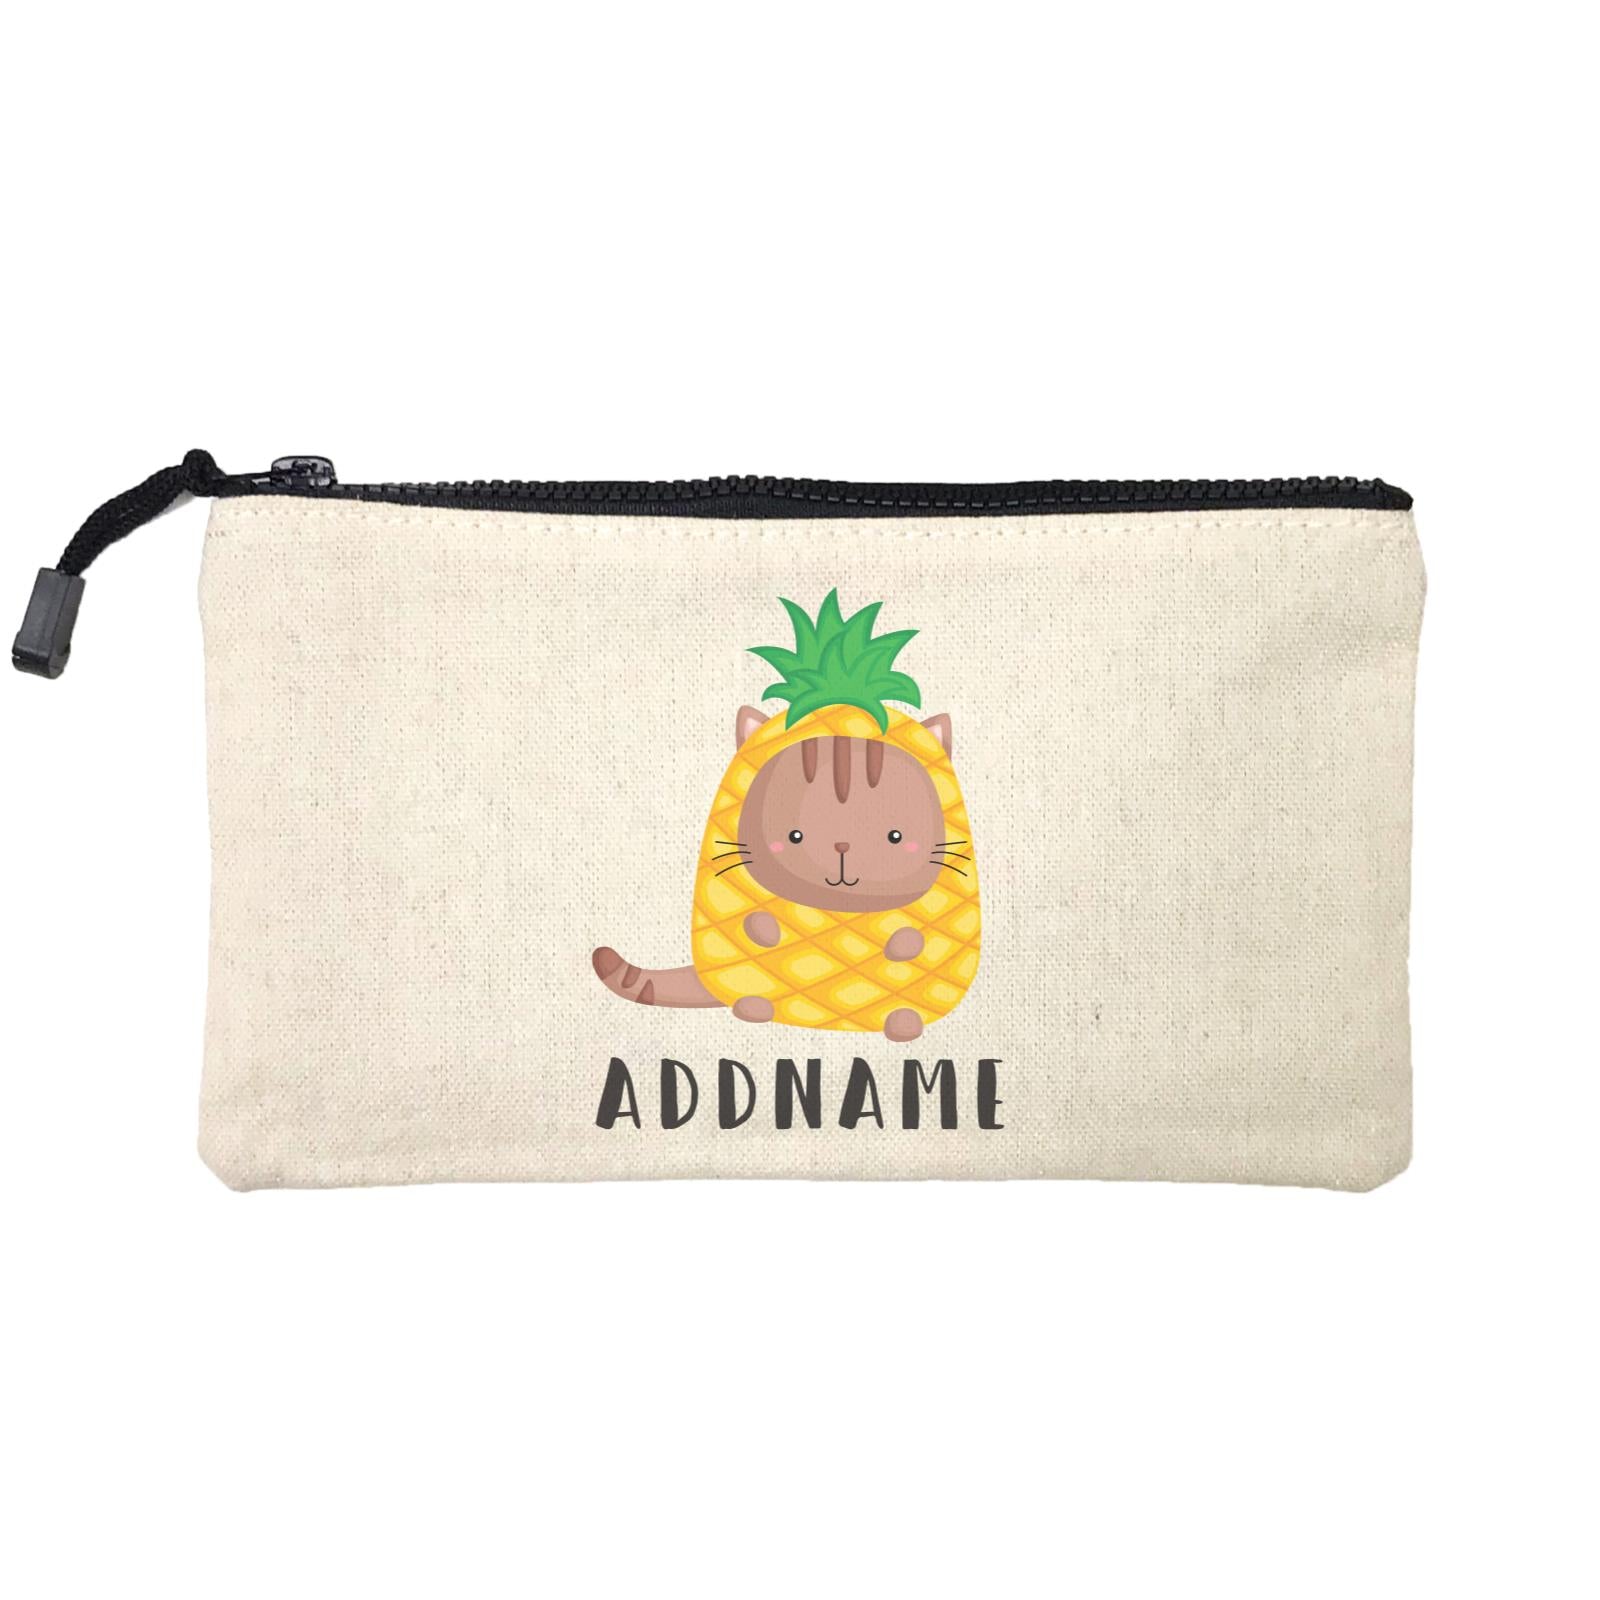 Birthday Hawaii Cute Cat Wearing Pineapple Suit Addname Mini Accessories Stationery Pouch